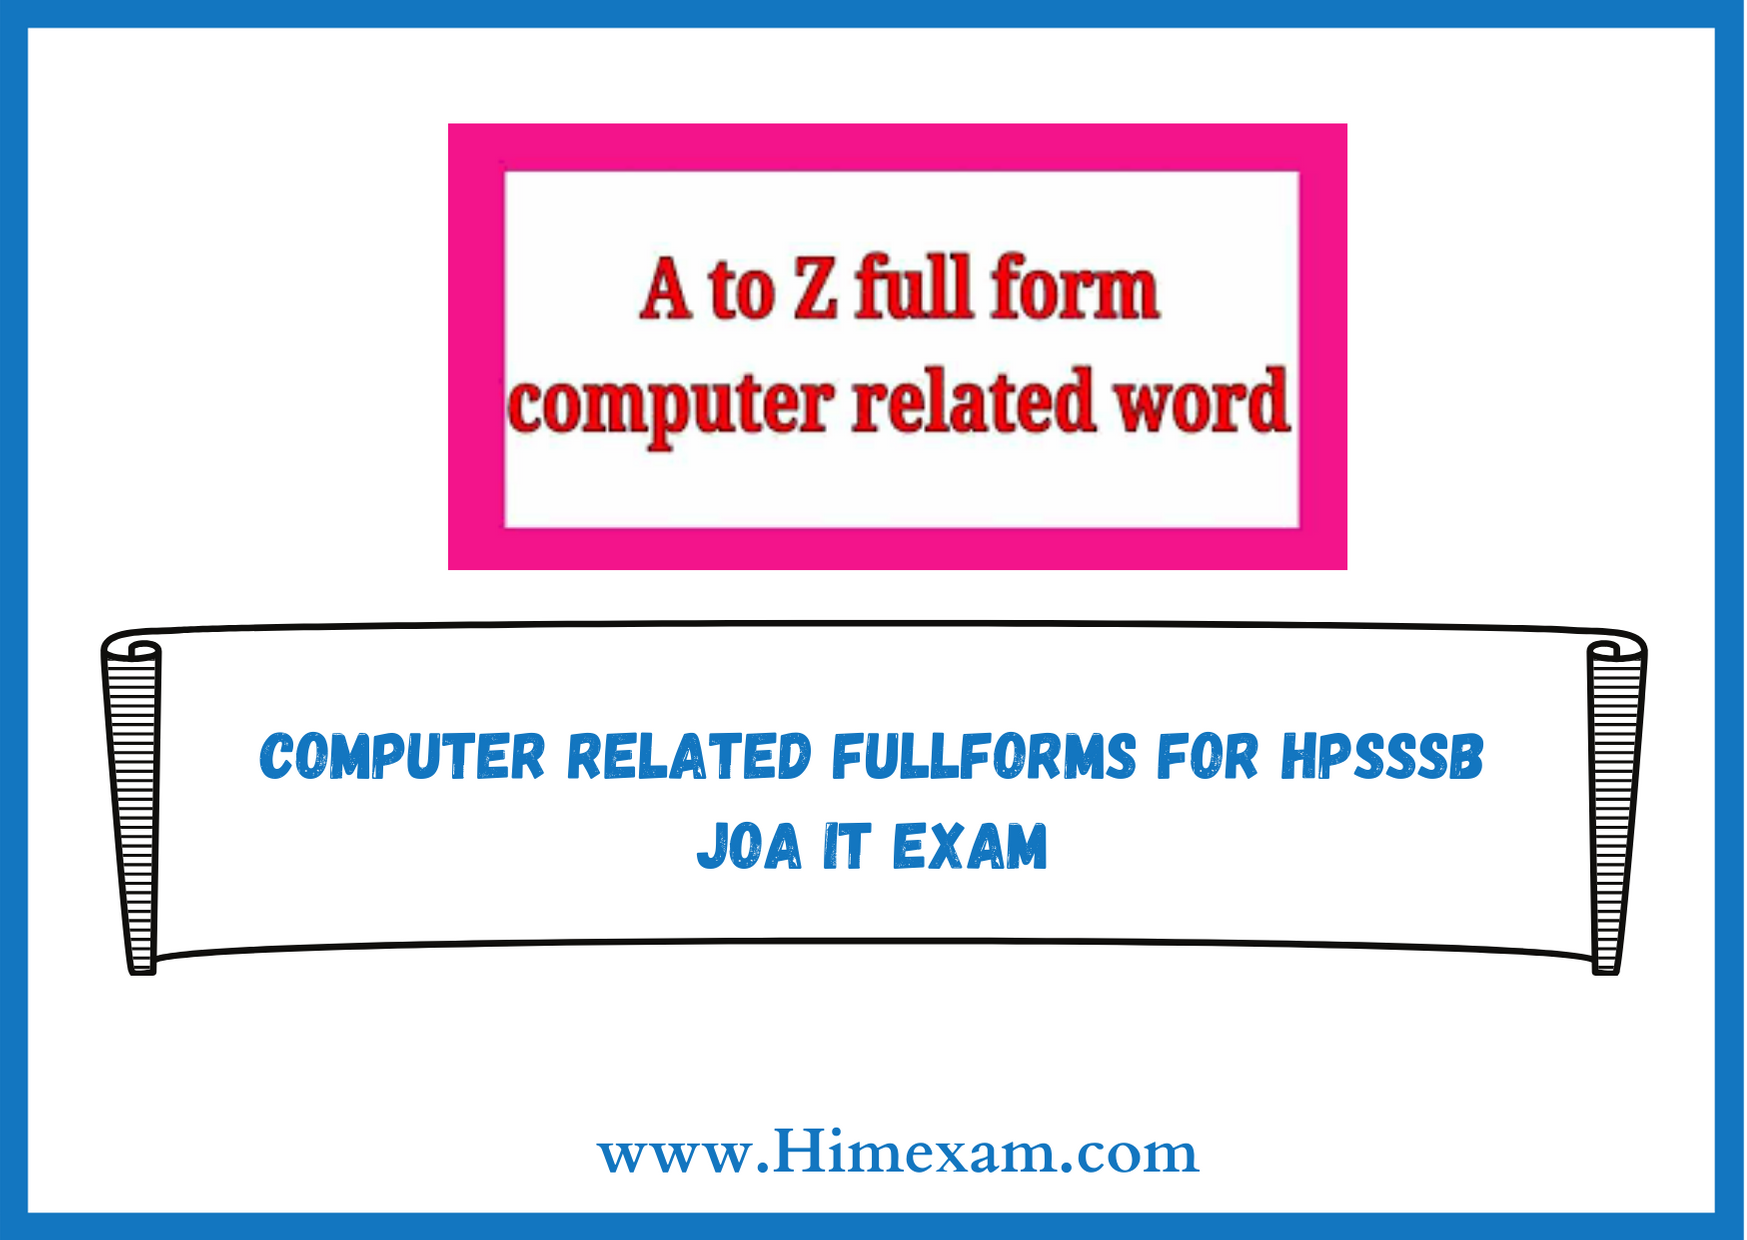 Computer Related FullForms For HPSSSB JOA IT (Post Code -939) Exam